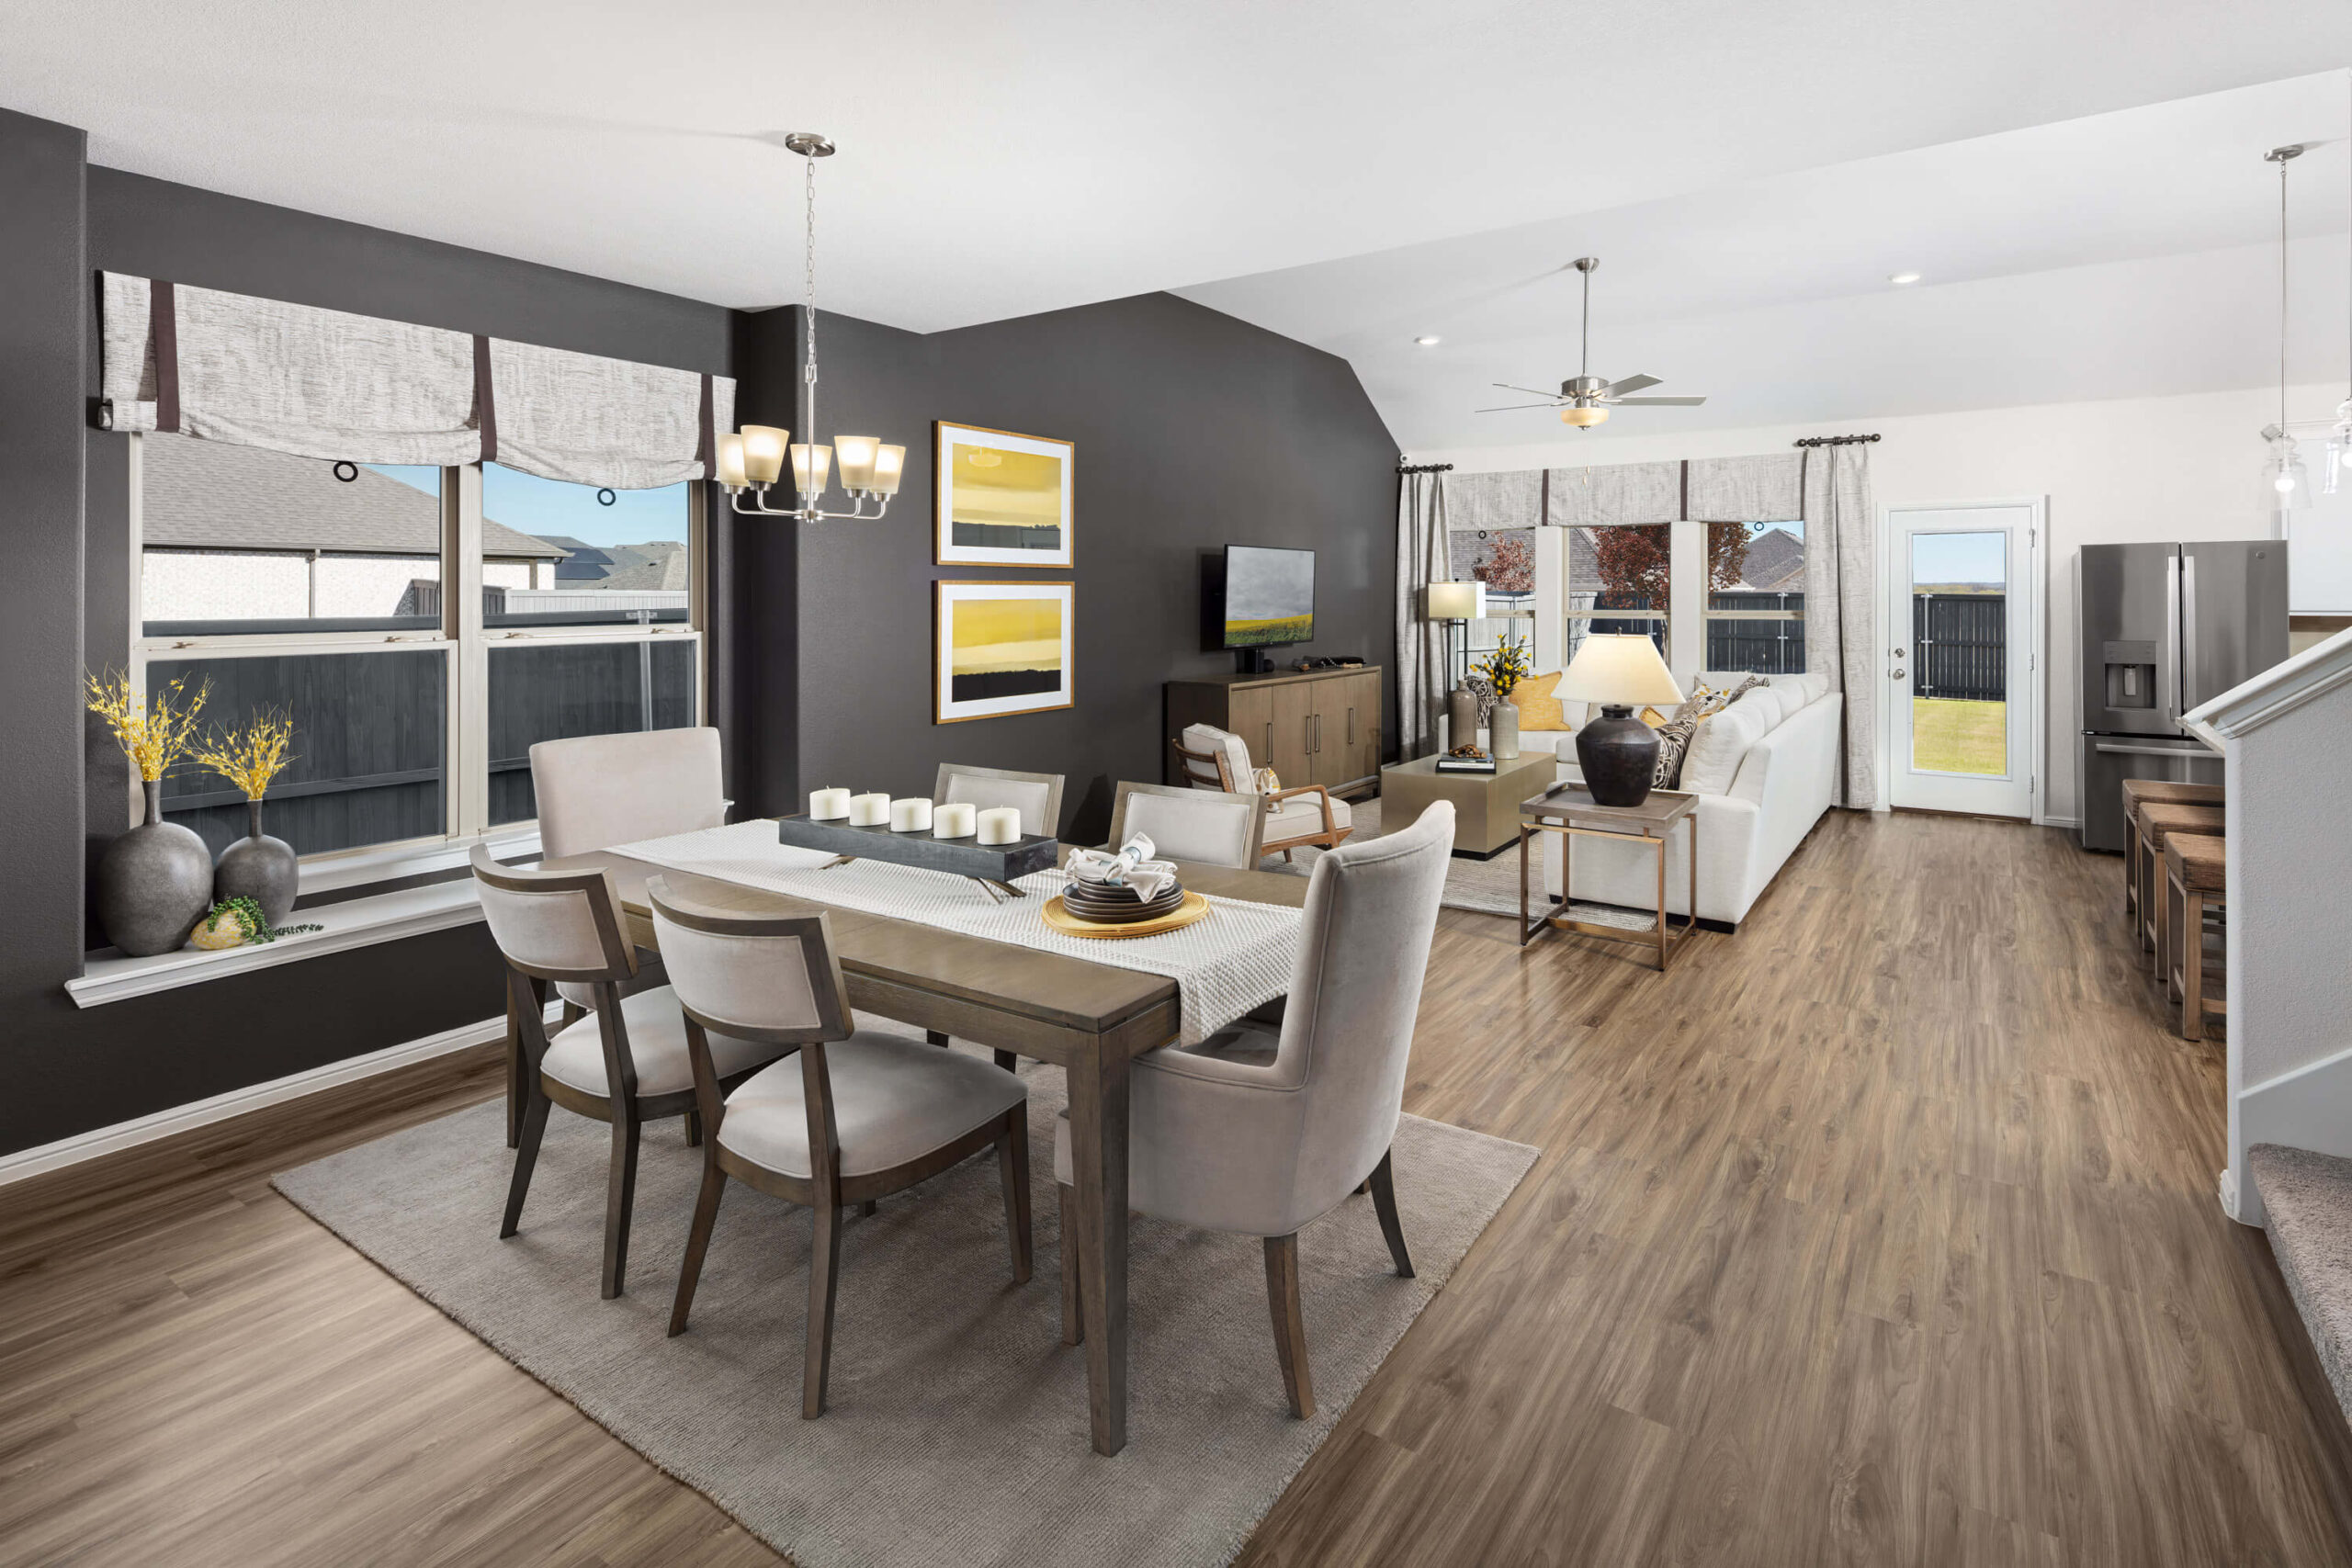 Modern dining and living area with an open floor plan, neutral tones, and pops of yellow accents in new home communities in Mansfield TX.